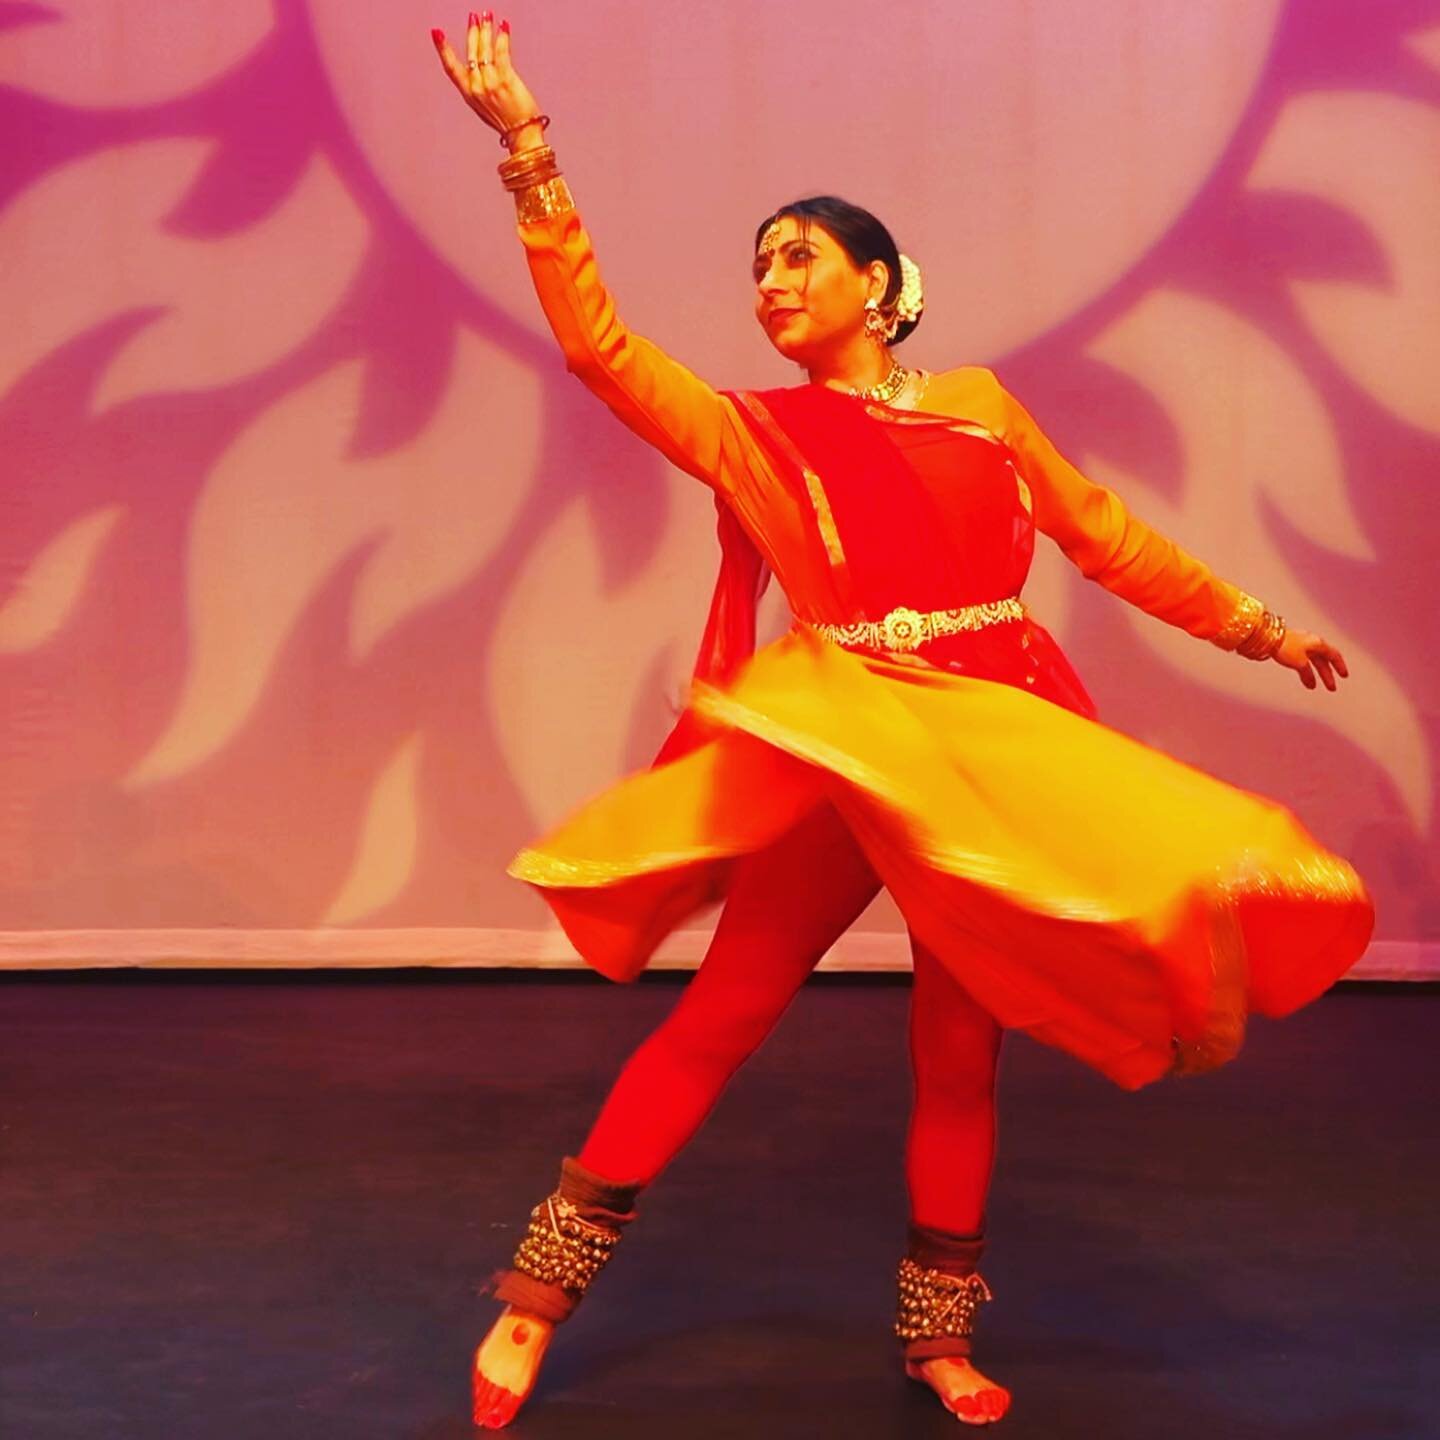 This moment&hellip;like the sun rising after the darkest dawn🌞So much fun performing with my dancing friends and my beautiful teacher (not pictured). I had forgotten how much I love to perform 💃🏽💃🏽💃🏽#thesunshallriseagain #kathak #kathakdance #